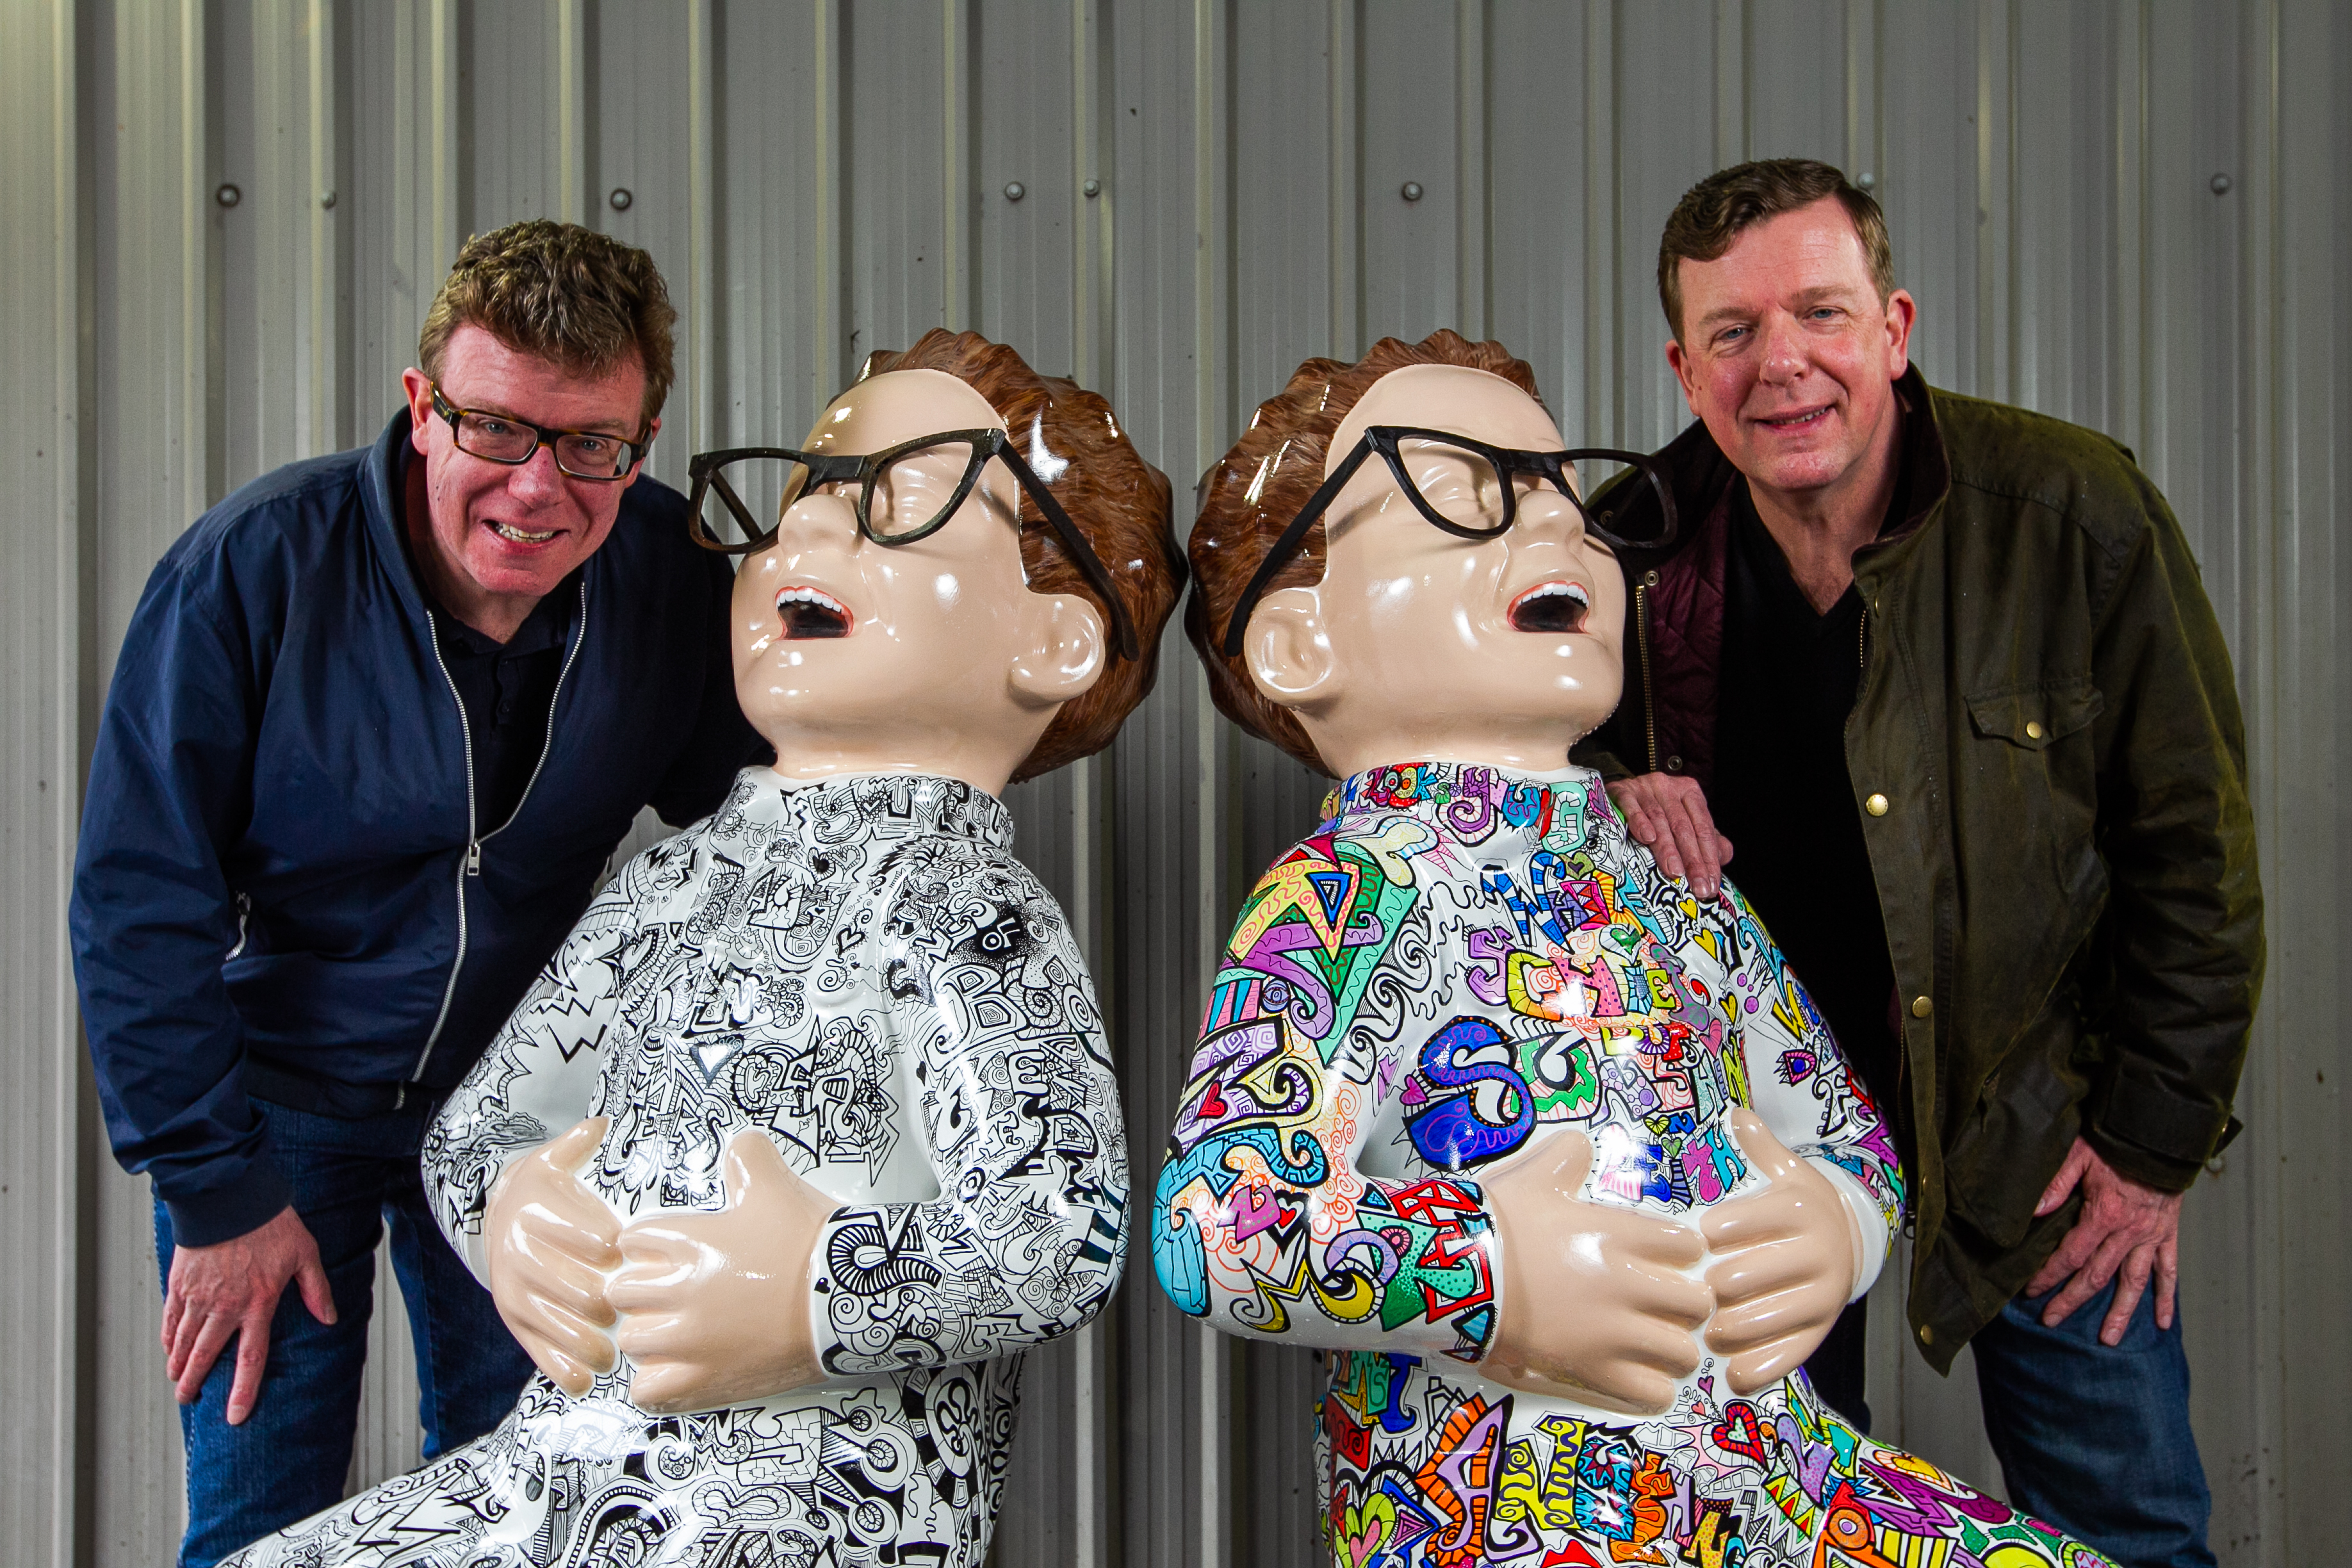 The Proclaimers, Charlie and Craig Reid, signing Oor Wullie statues for the Bucket Trail